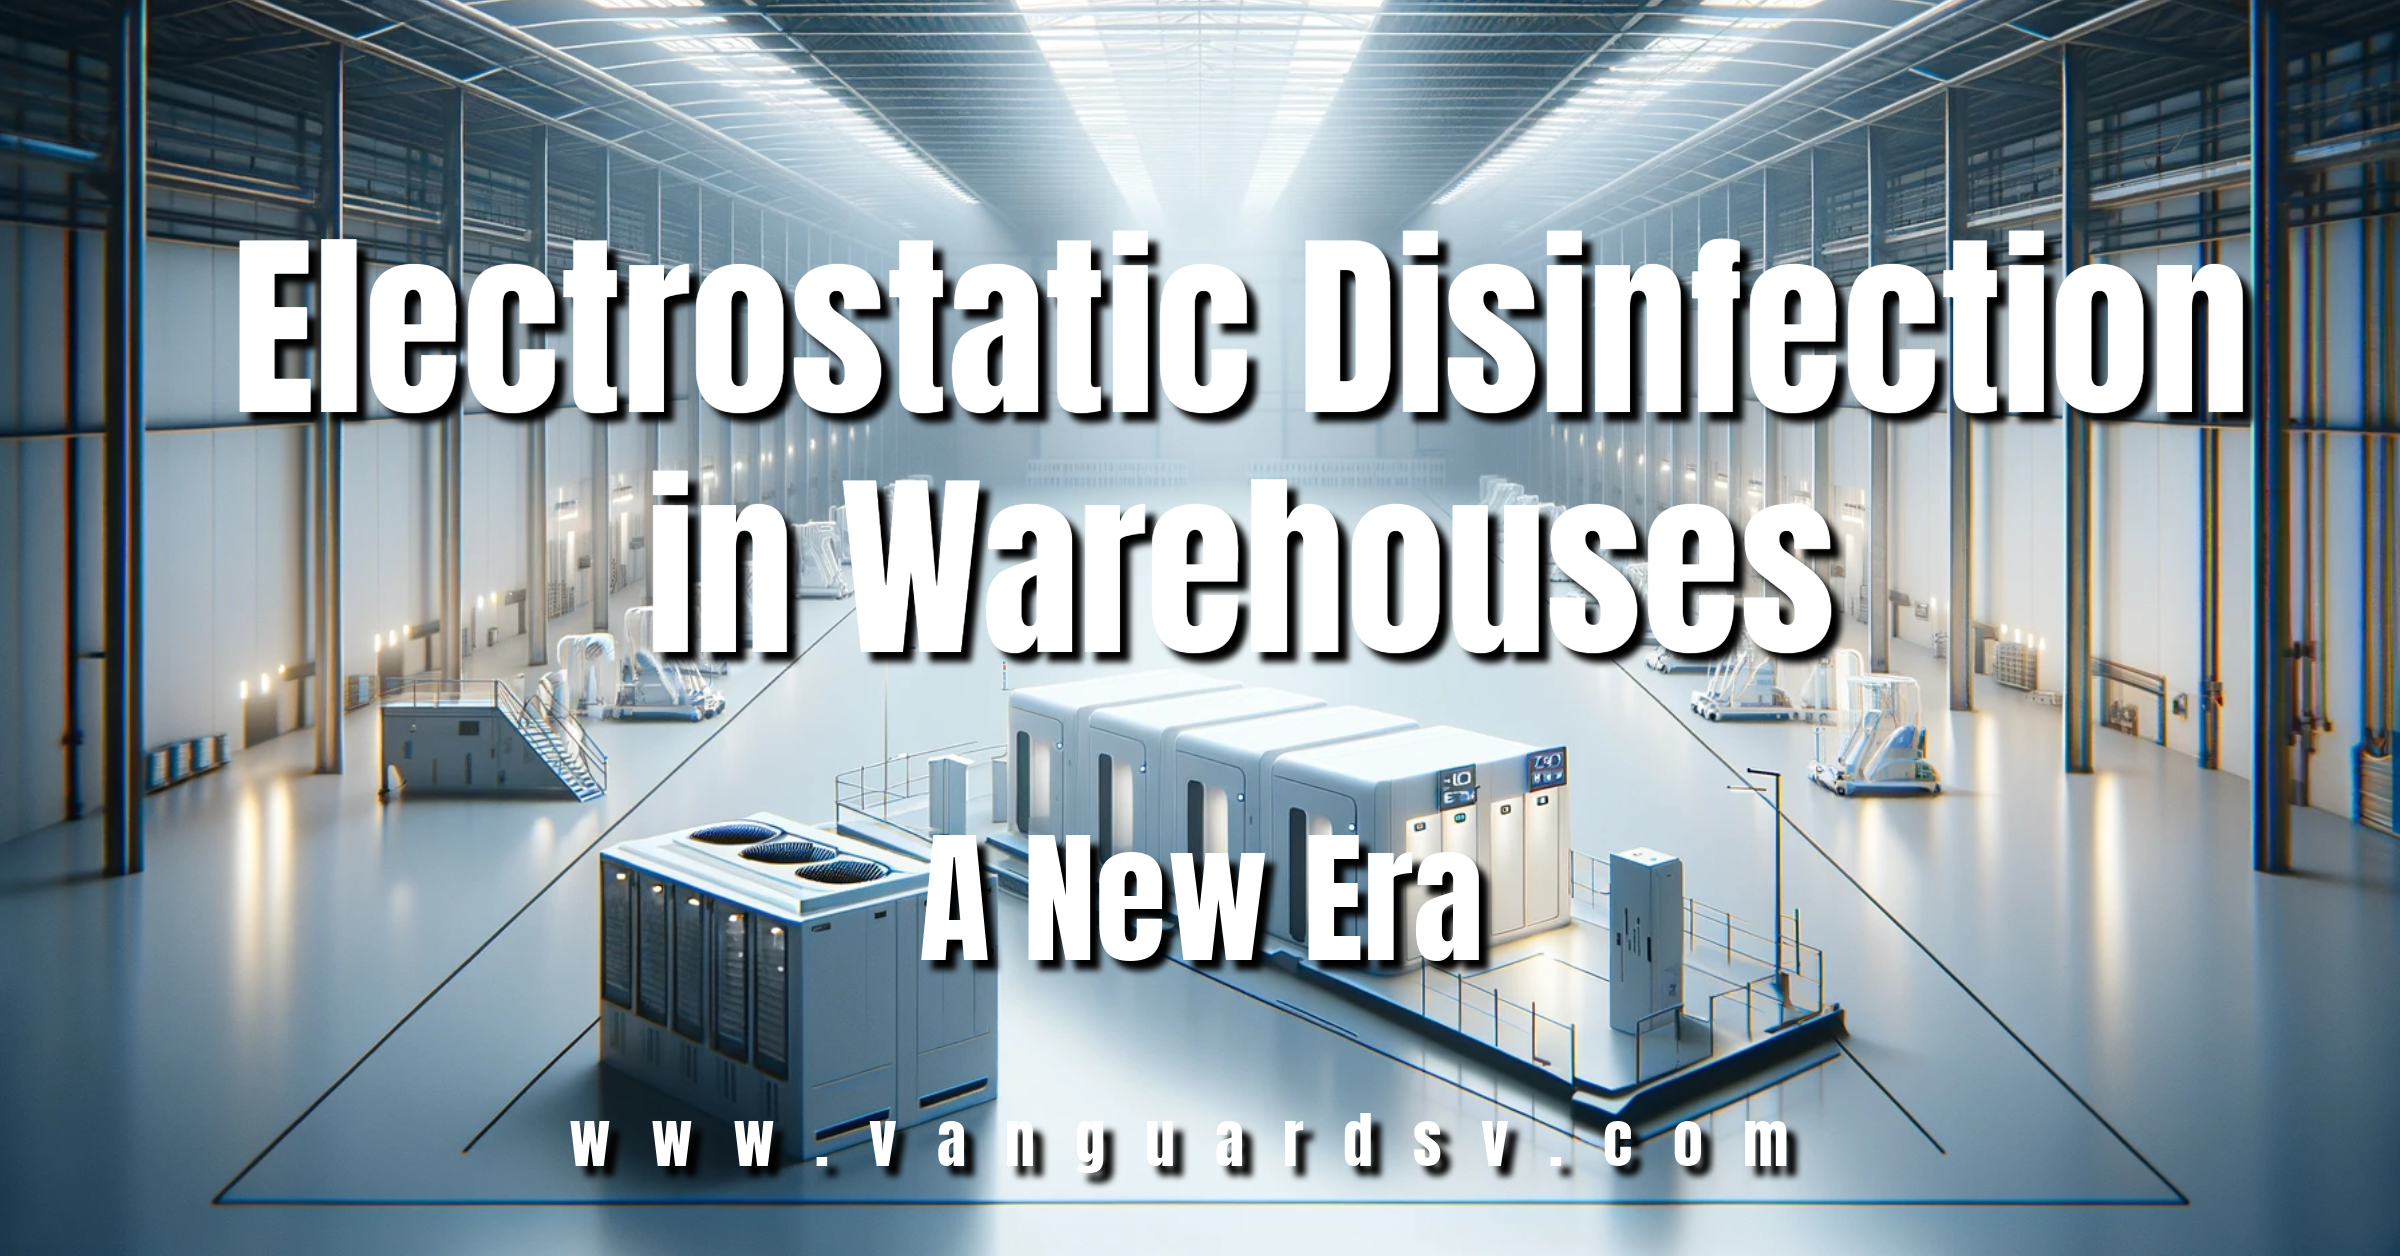 Electrostatic Disinfection in Warehouses: A New Era